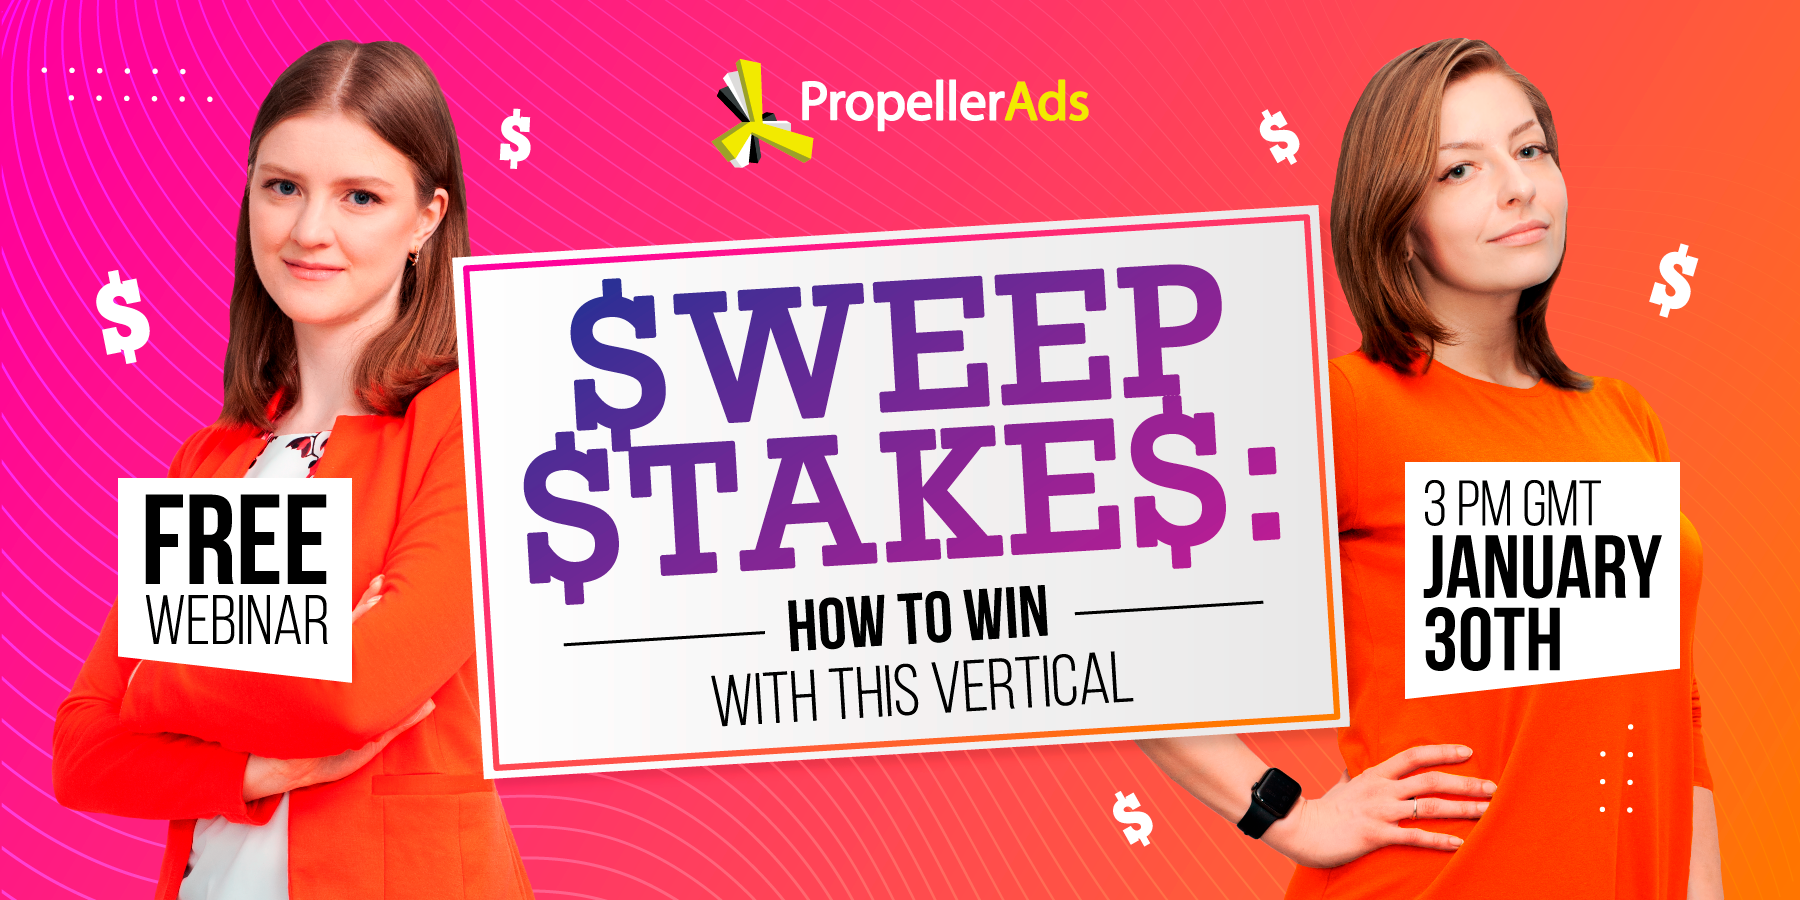 This article was initially published in March 2020, but it’s been updated in July 2023, due to accuracy reasons. All the info in the article is applicable to Sweepstakes 2023. In the affiliate world, Sweepstakes offers give you a great opportunity to build engaging campaigns and generate a pretty penny, if you know what you’re